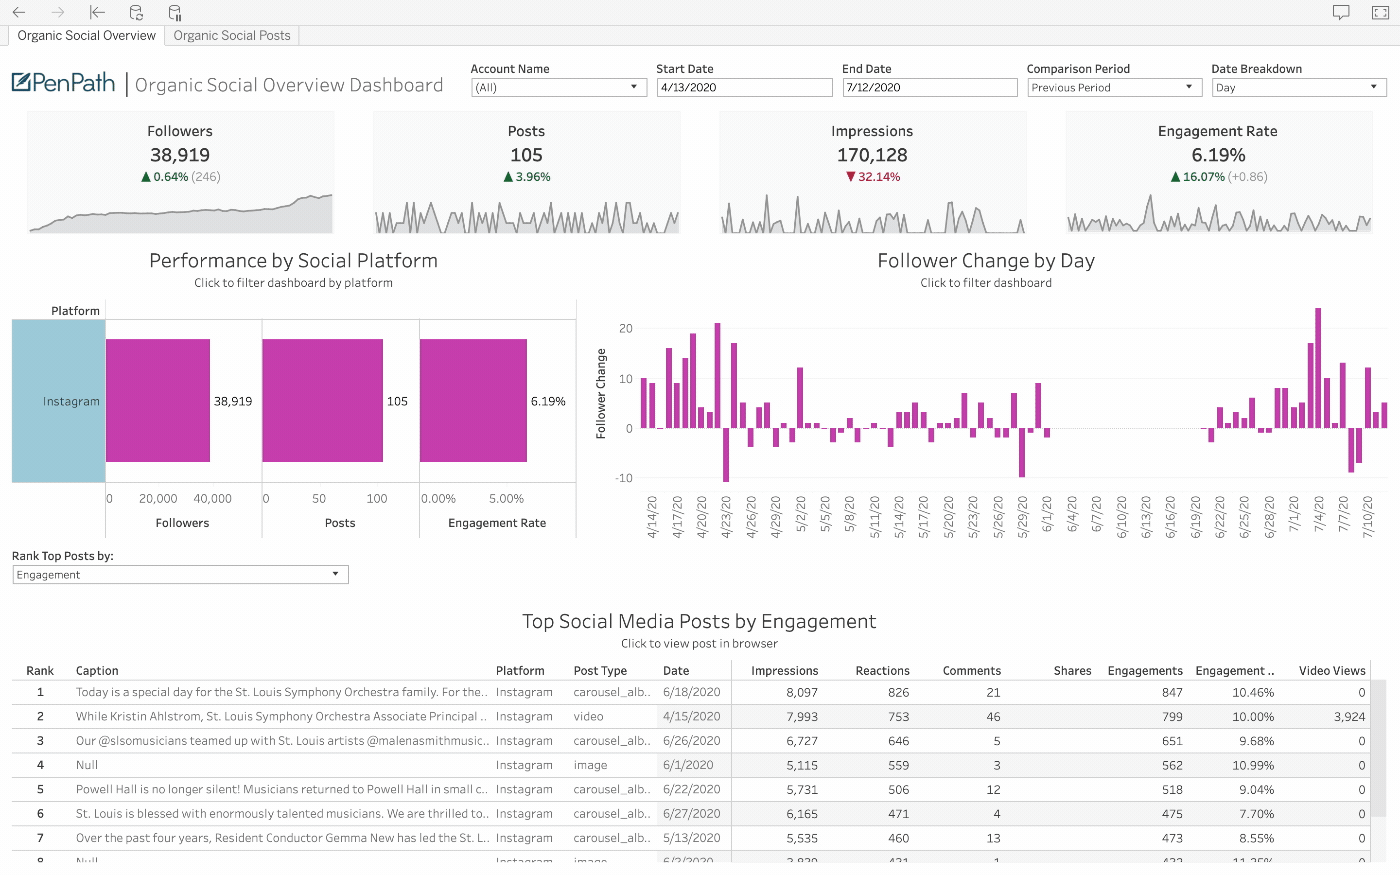 PenPath example of the Snapchat data source in a BI dashboard